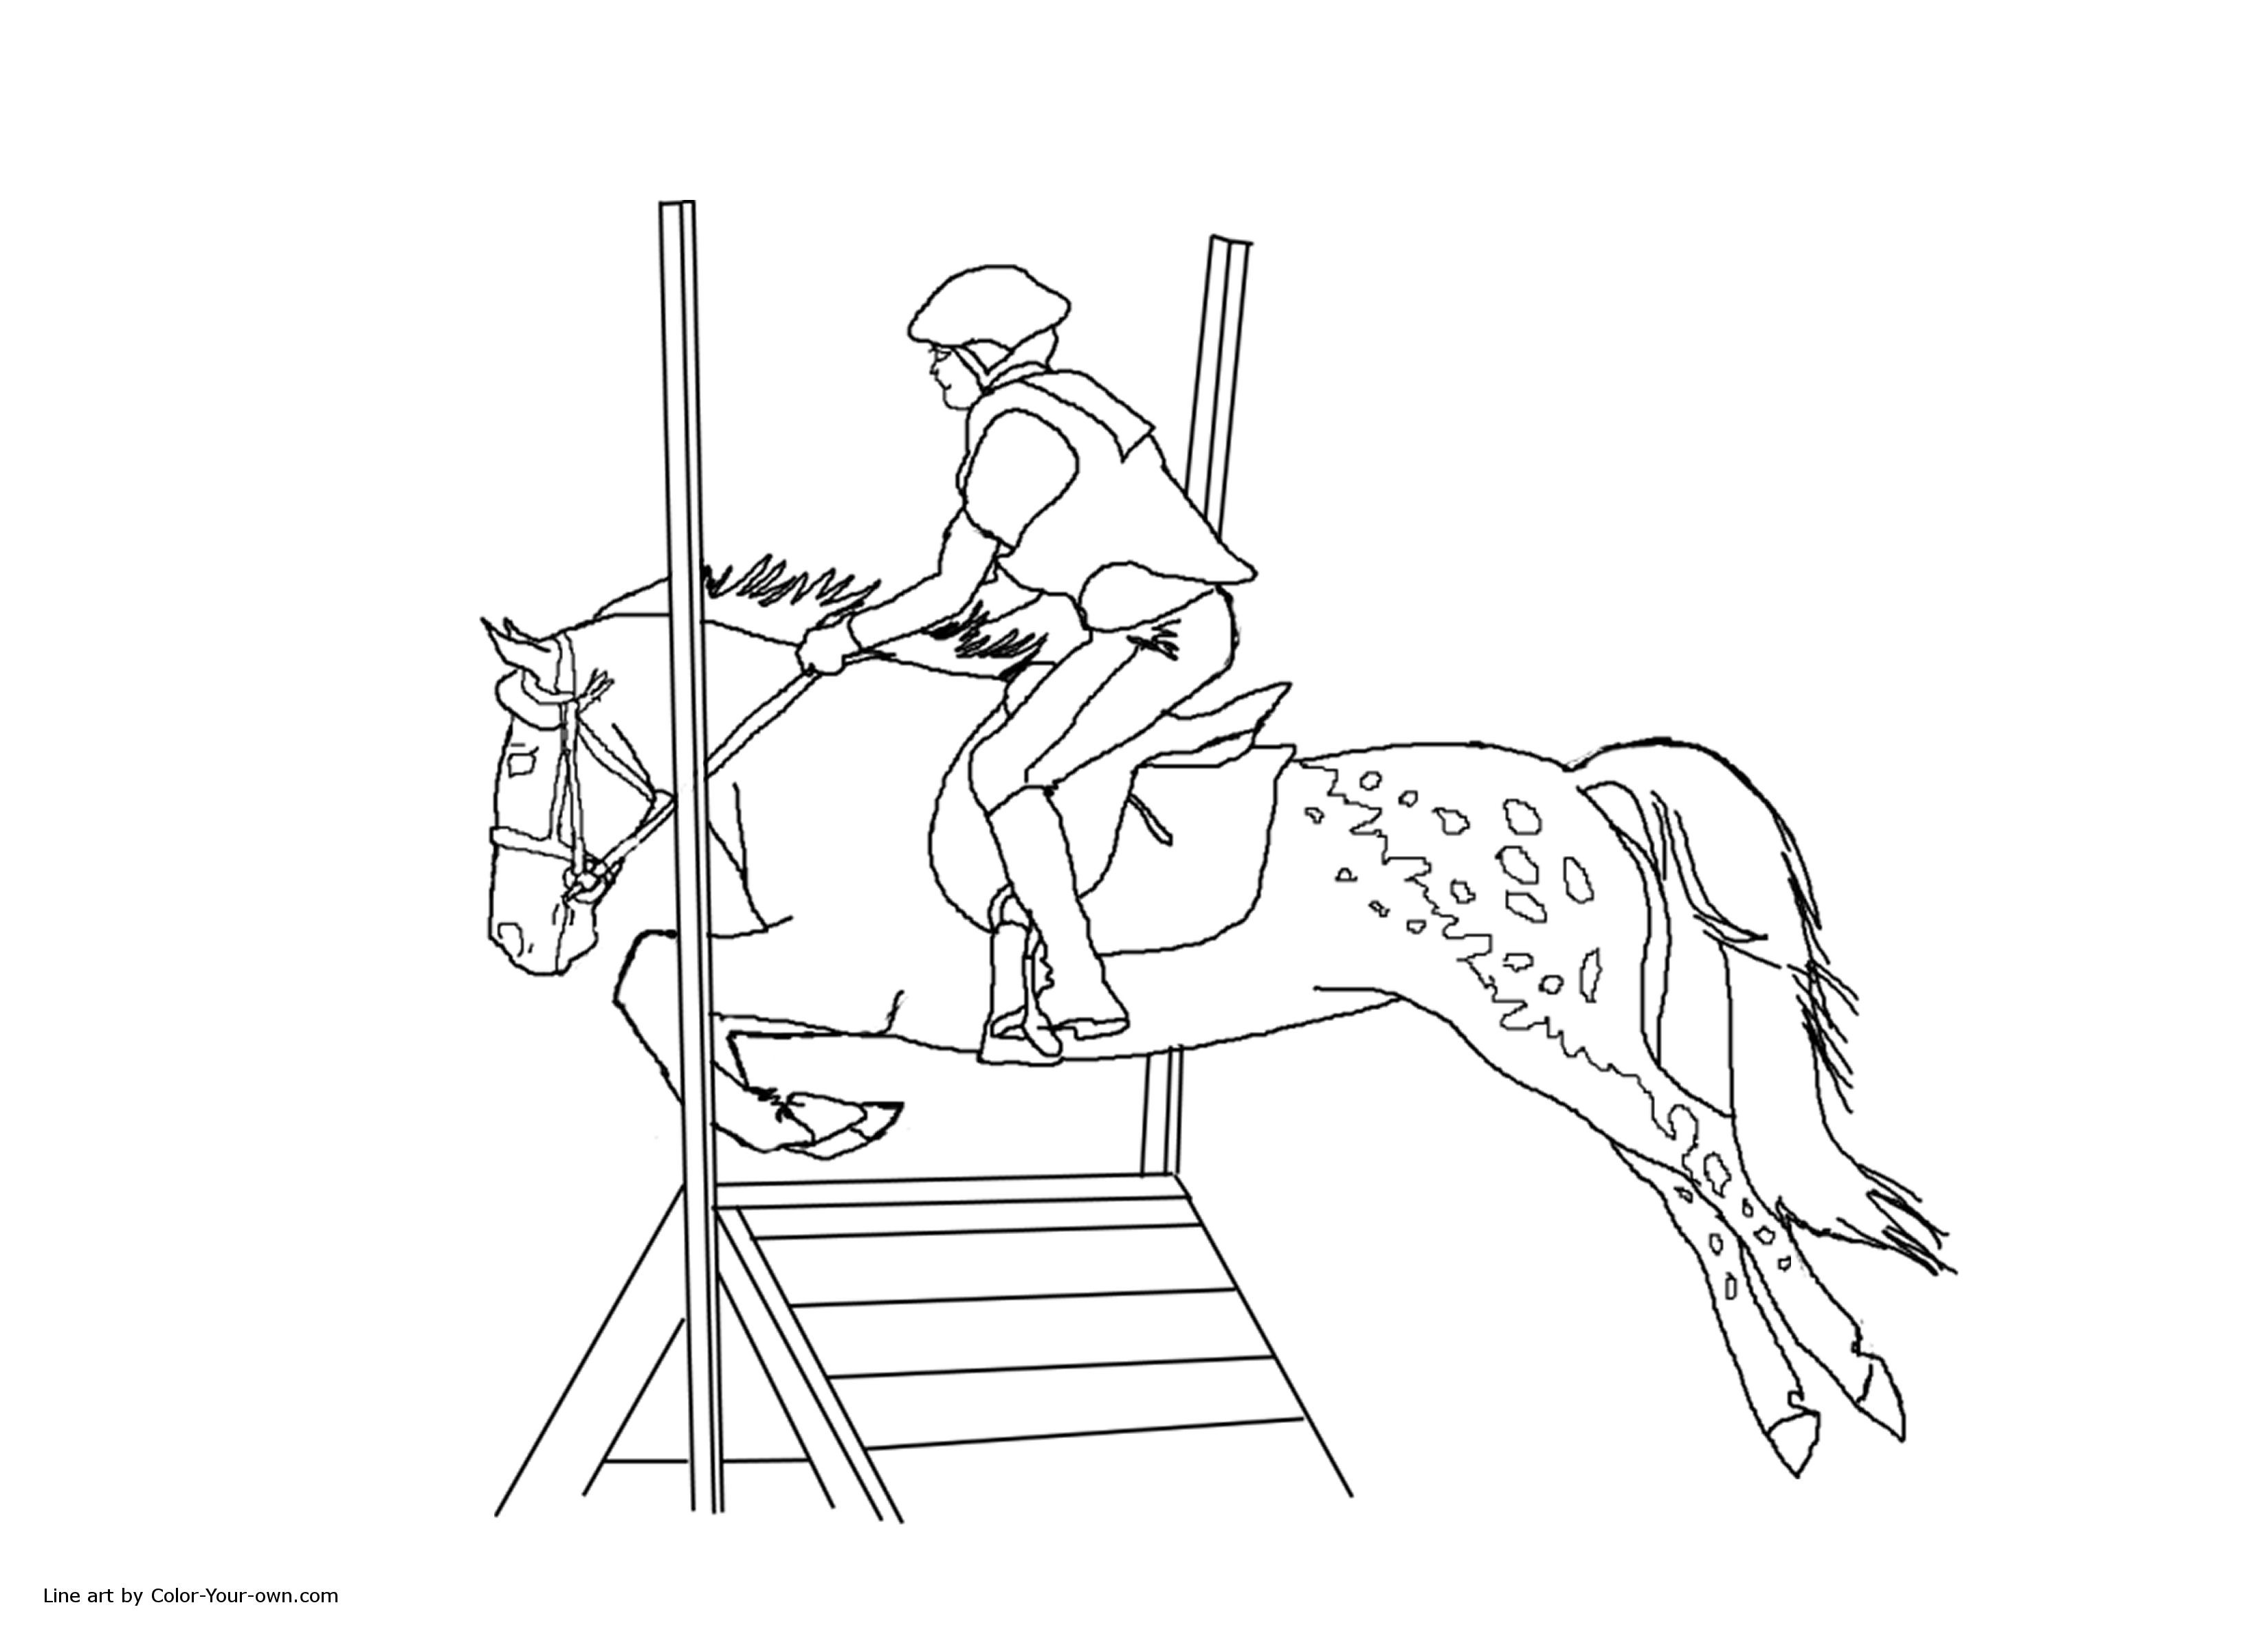 Horse Jumping Coloring Pages at GetColorings.com | Free printable